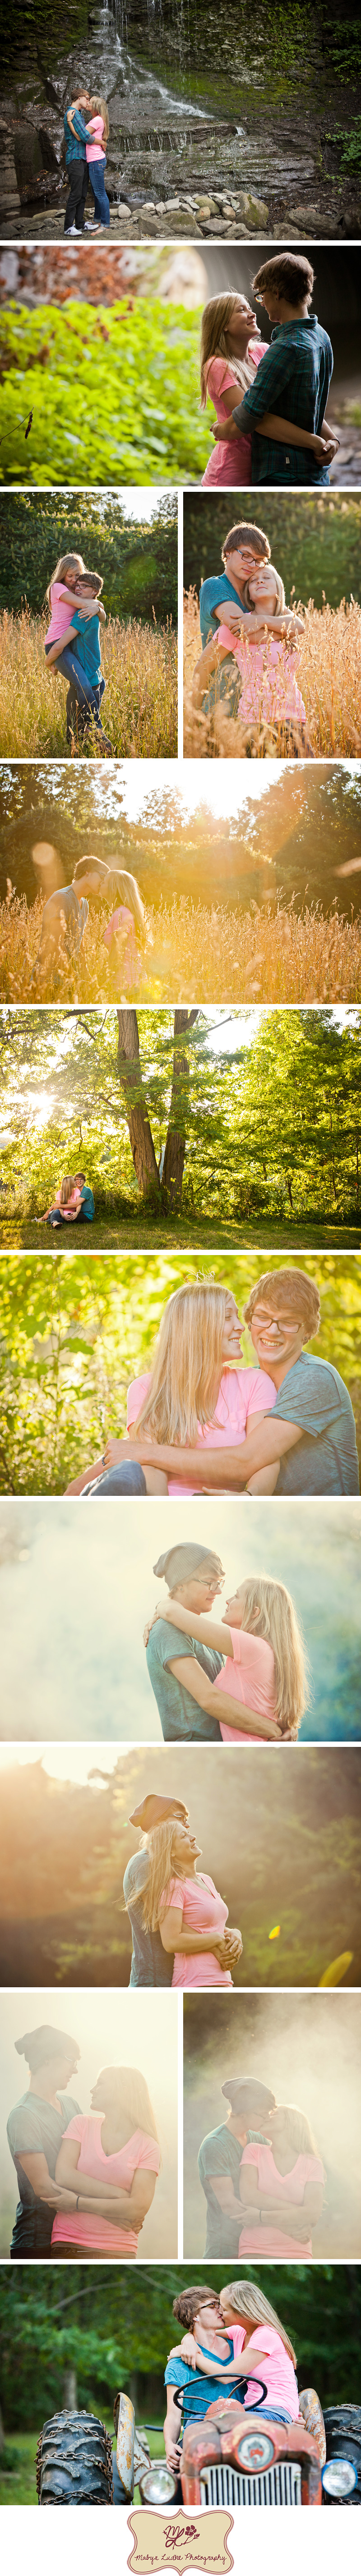 Skaneateles Engagement Session Mabyn Ludke Photography